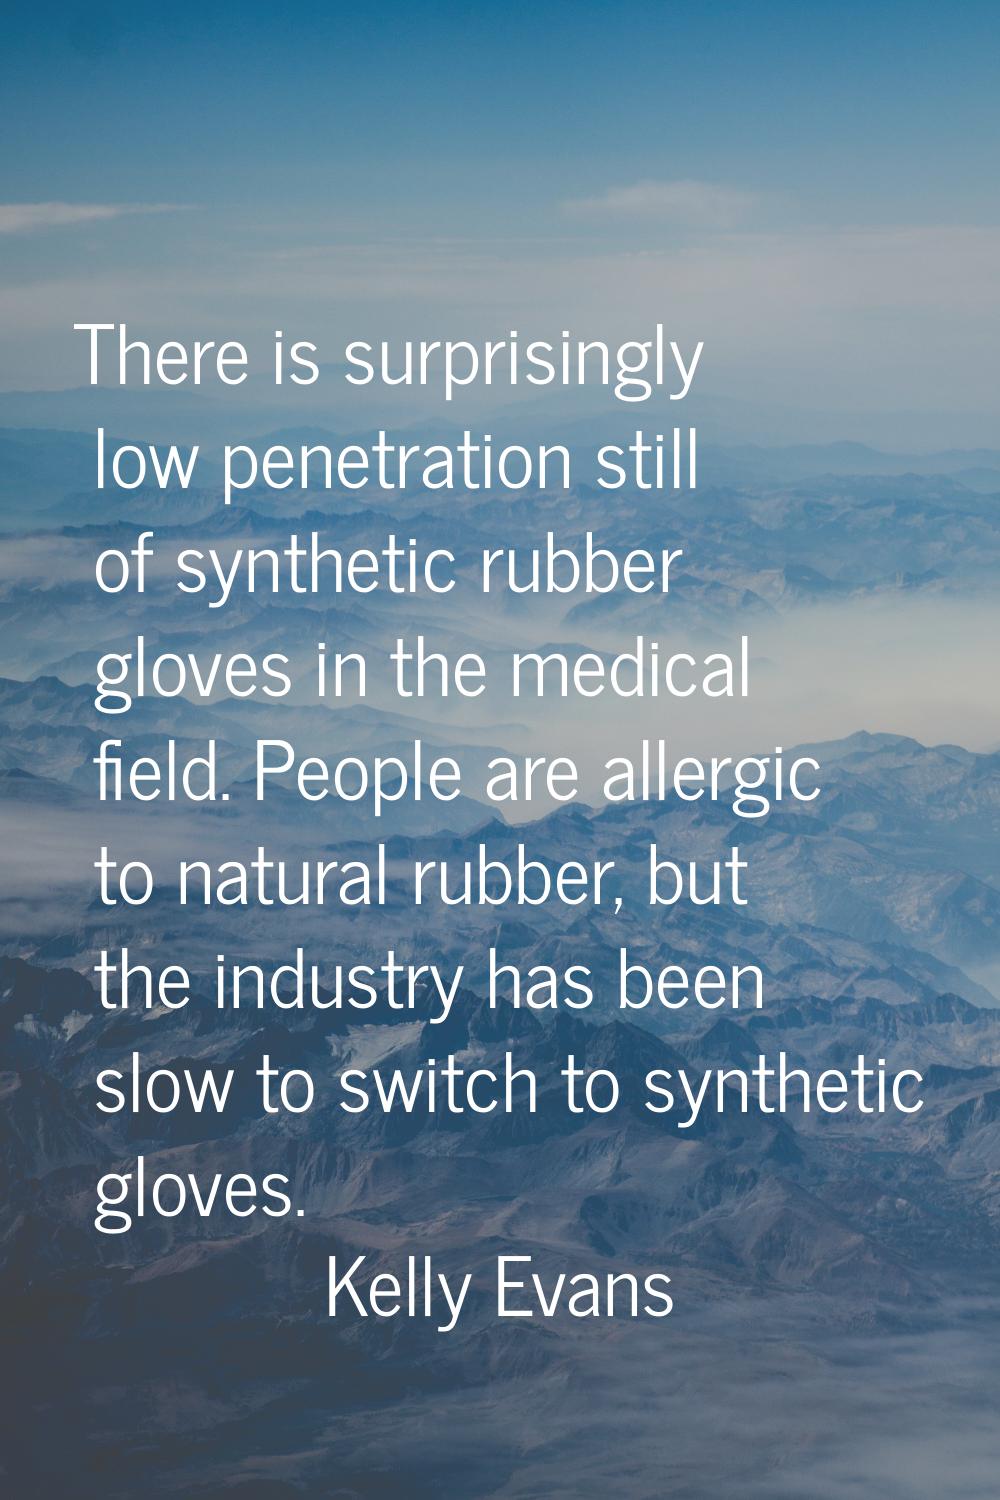 There is surprisingly low penetration still of synthetic rubber gloves in the medical field. People